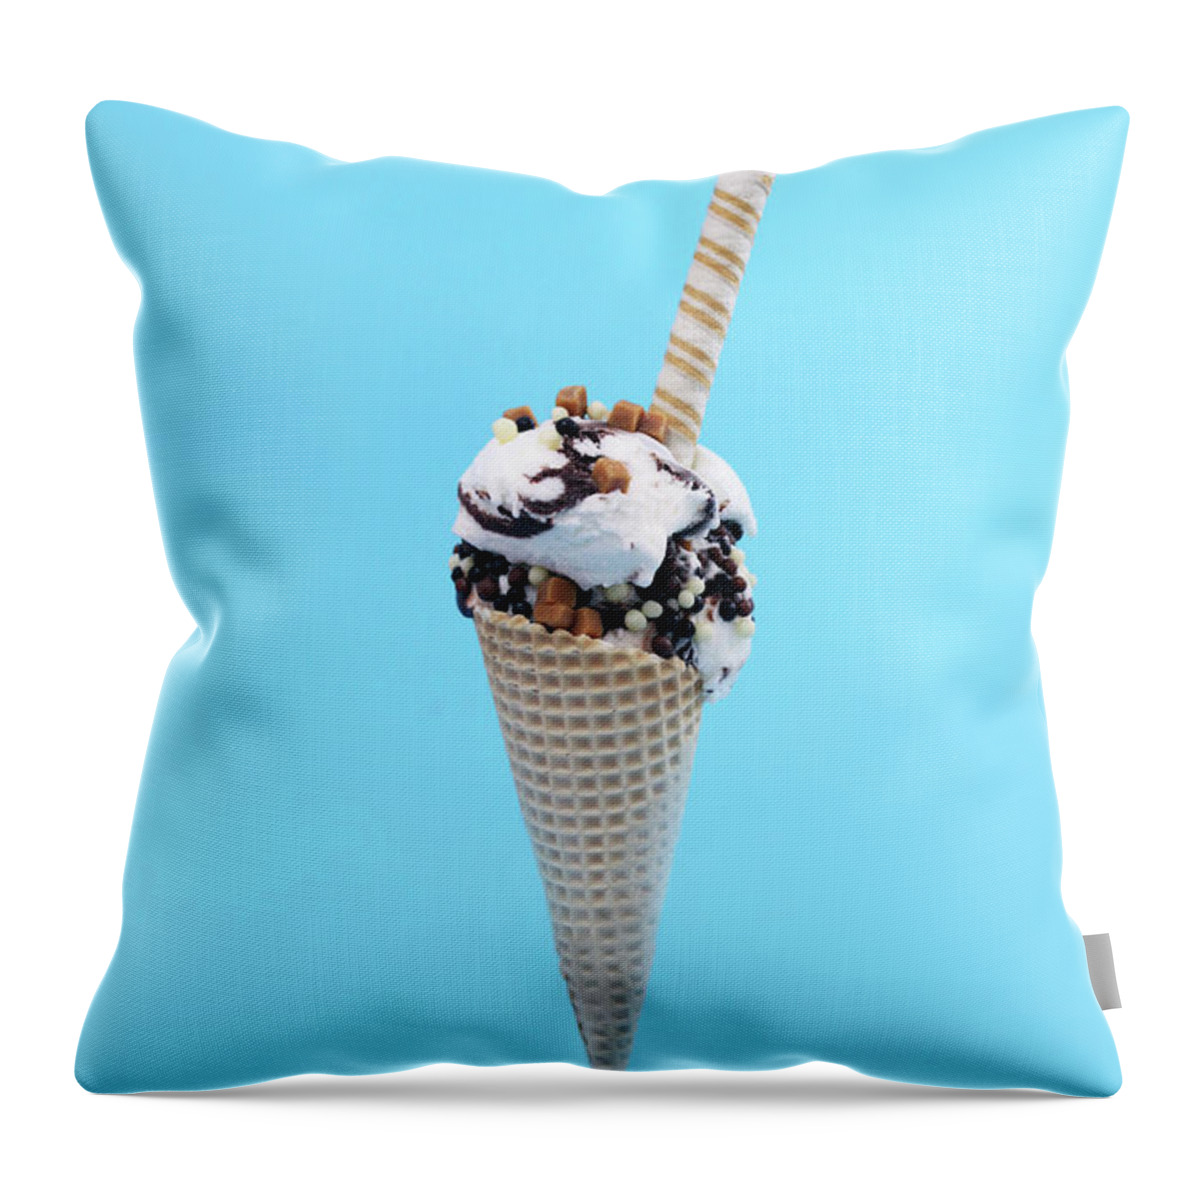 Temptation Throw Pillow featuring the photograph Classic Summer Ice Cream With Flake by Kelly Bowden